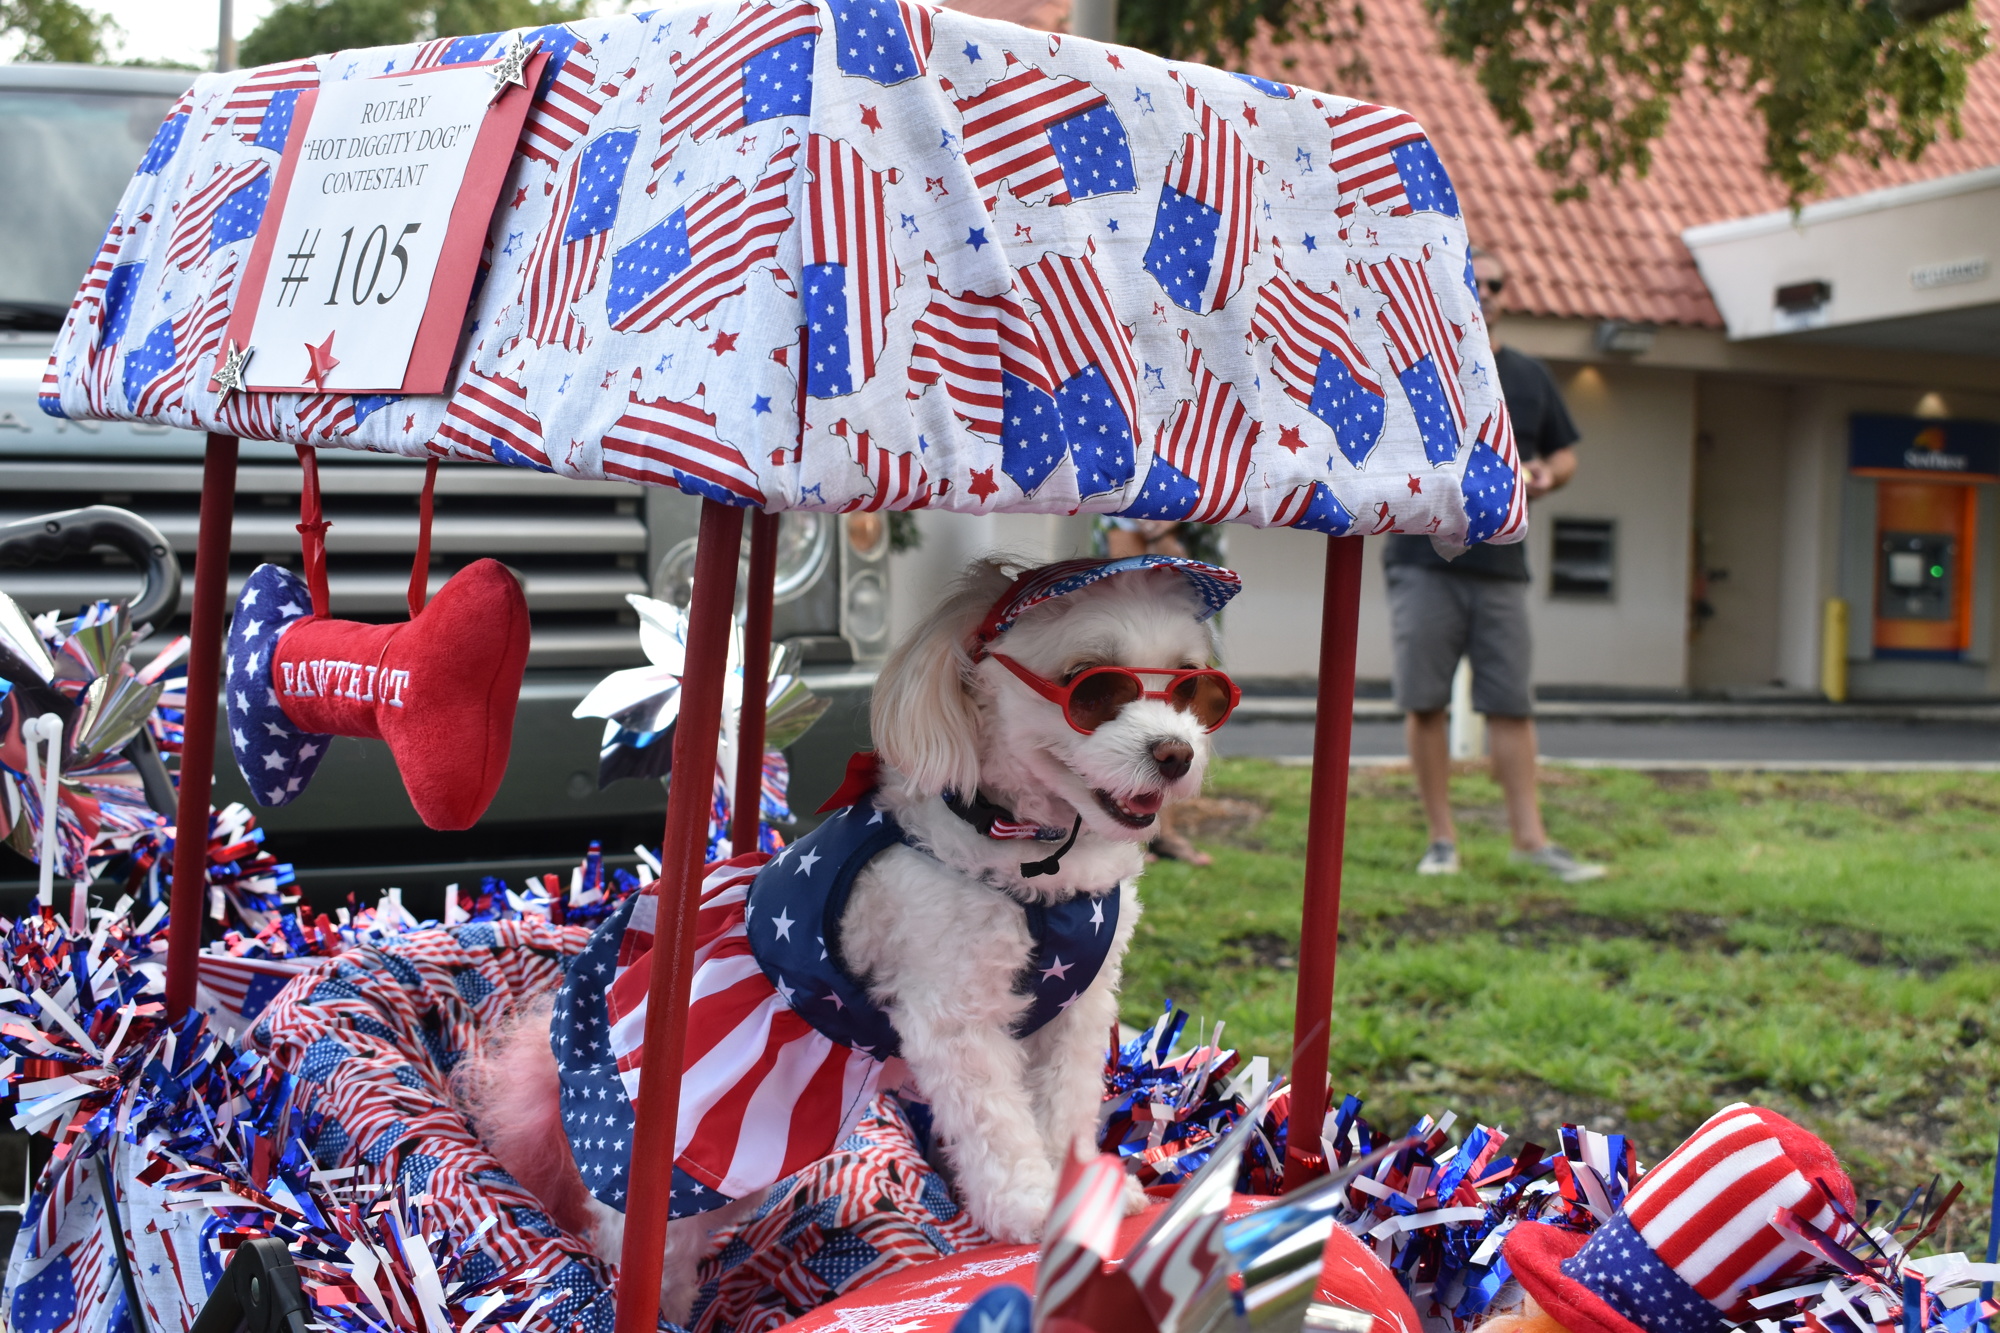 Nancy and Tony Roberts' dog Biscuit was decked out in Fourth of July attire at the 2021 Freedom Fest. (File photo)